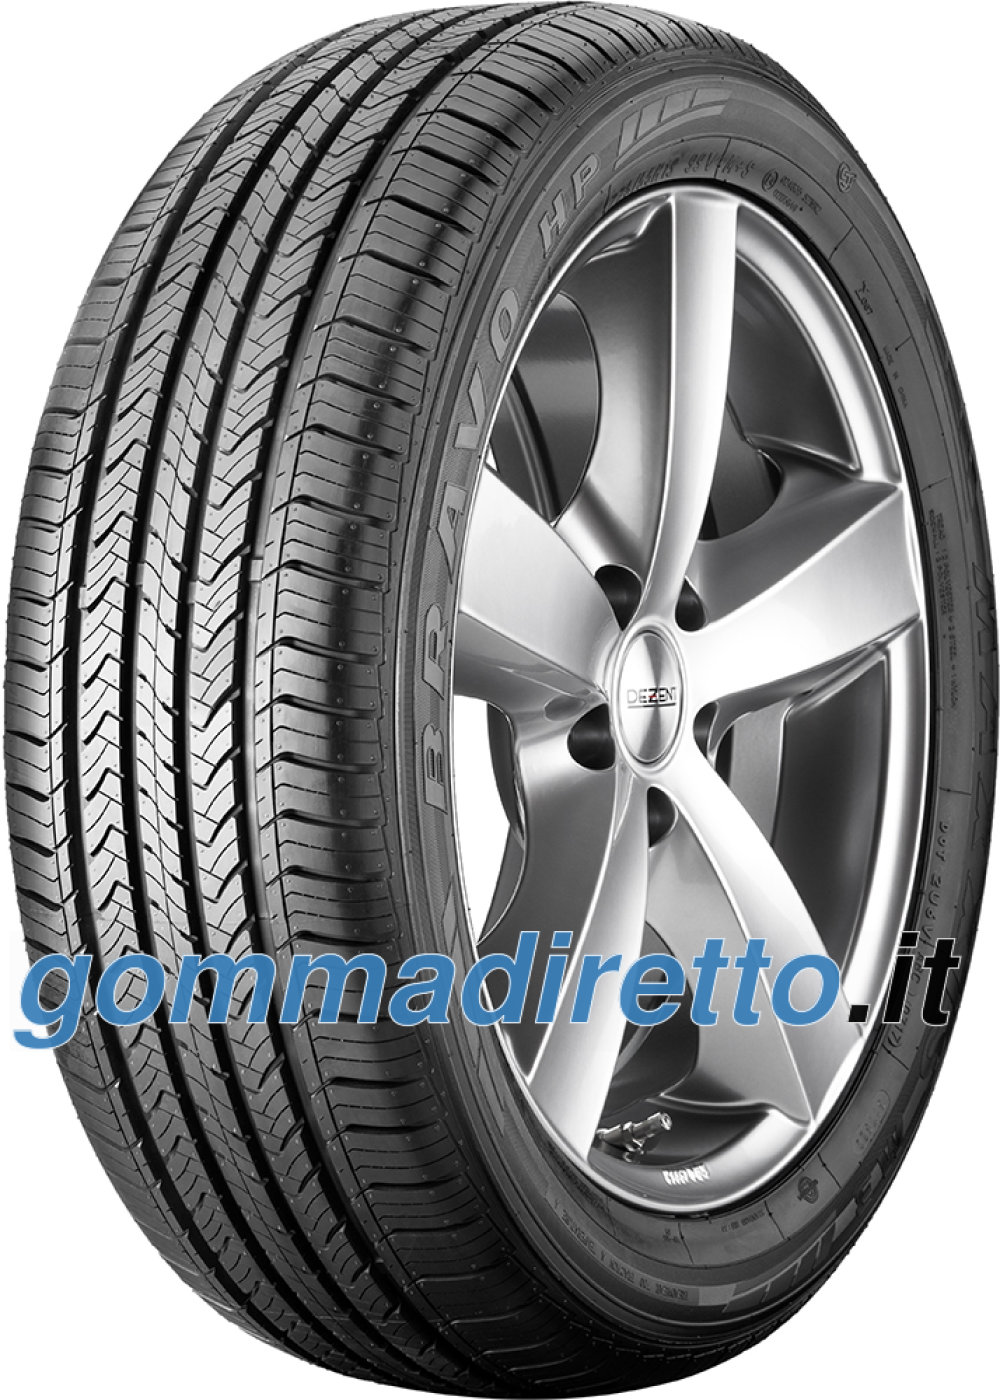 Image of Maxxis HP-M3 ( 255/60 R18 112V XL )